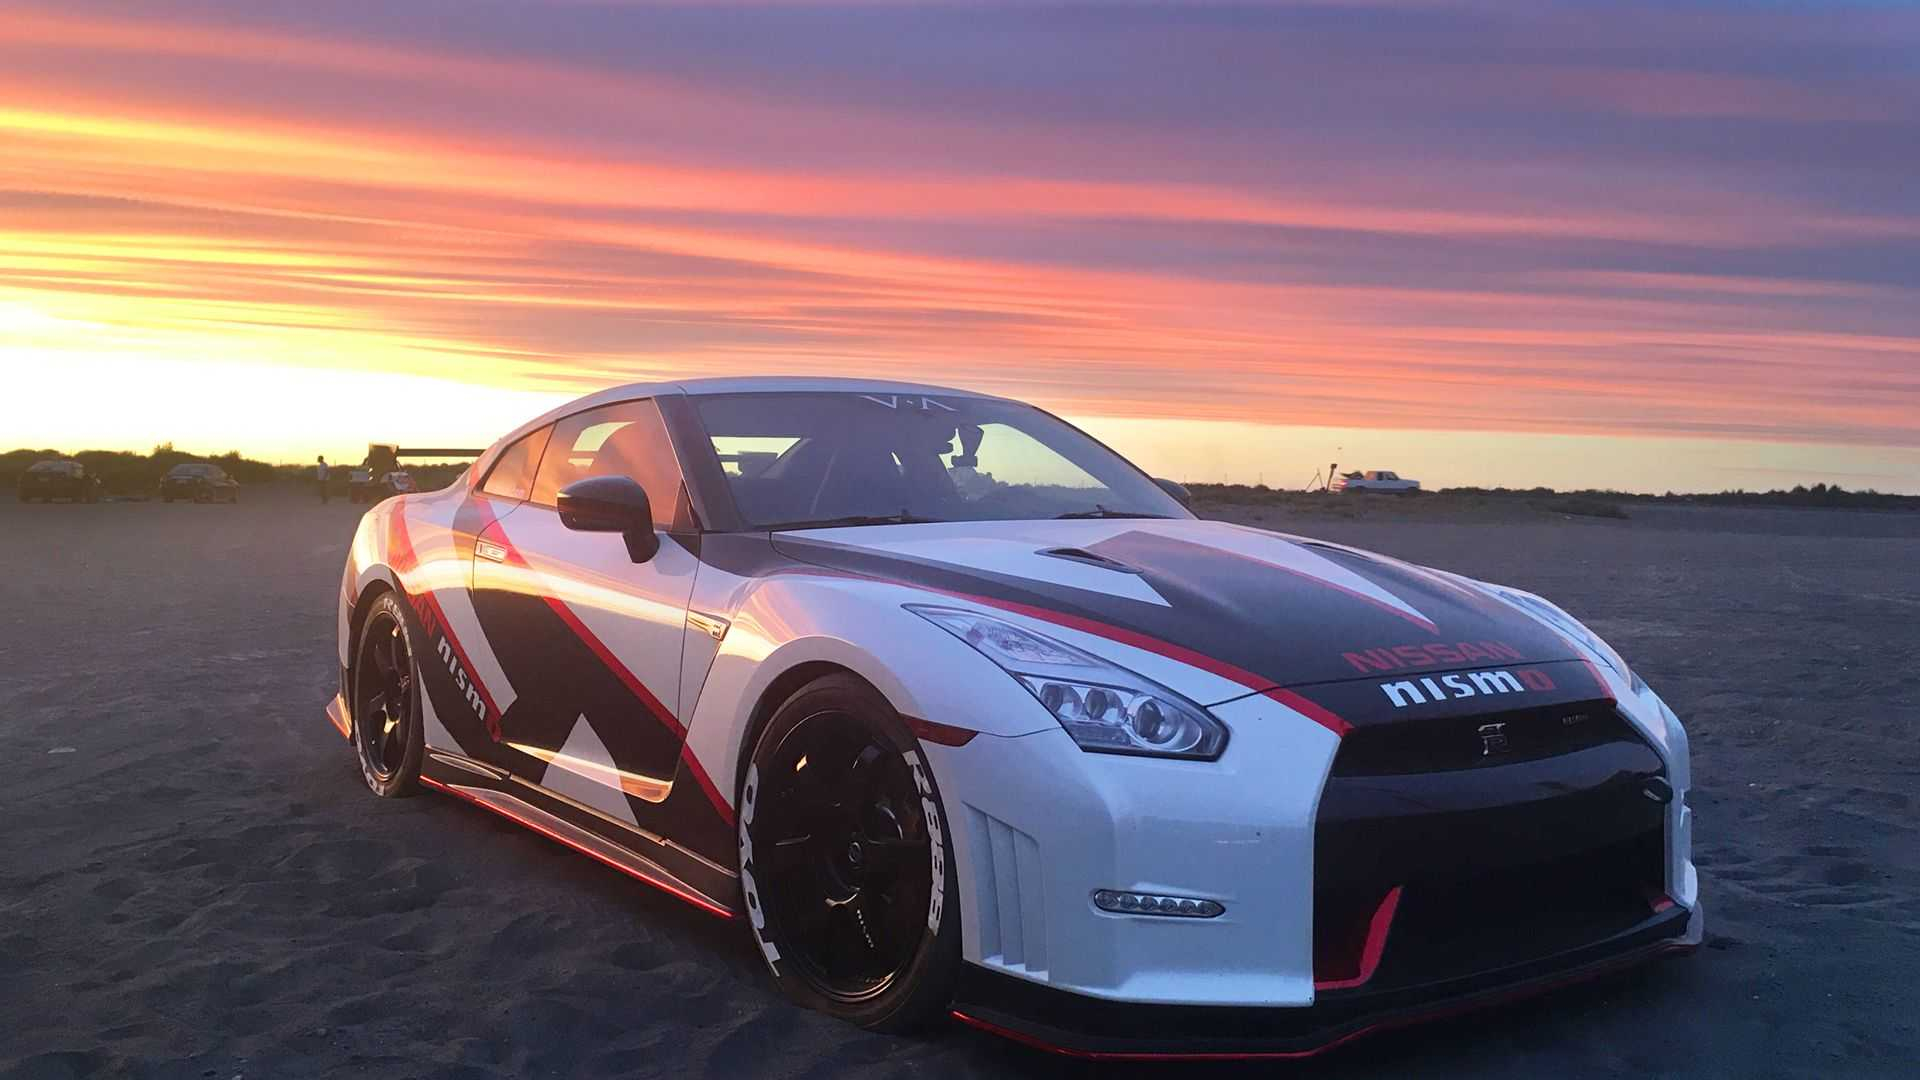 1920x1080 Nissan GTR Nismo Wallpaper Awesome Free HD Wallpapers